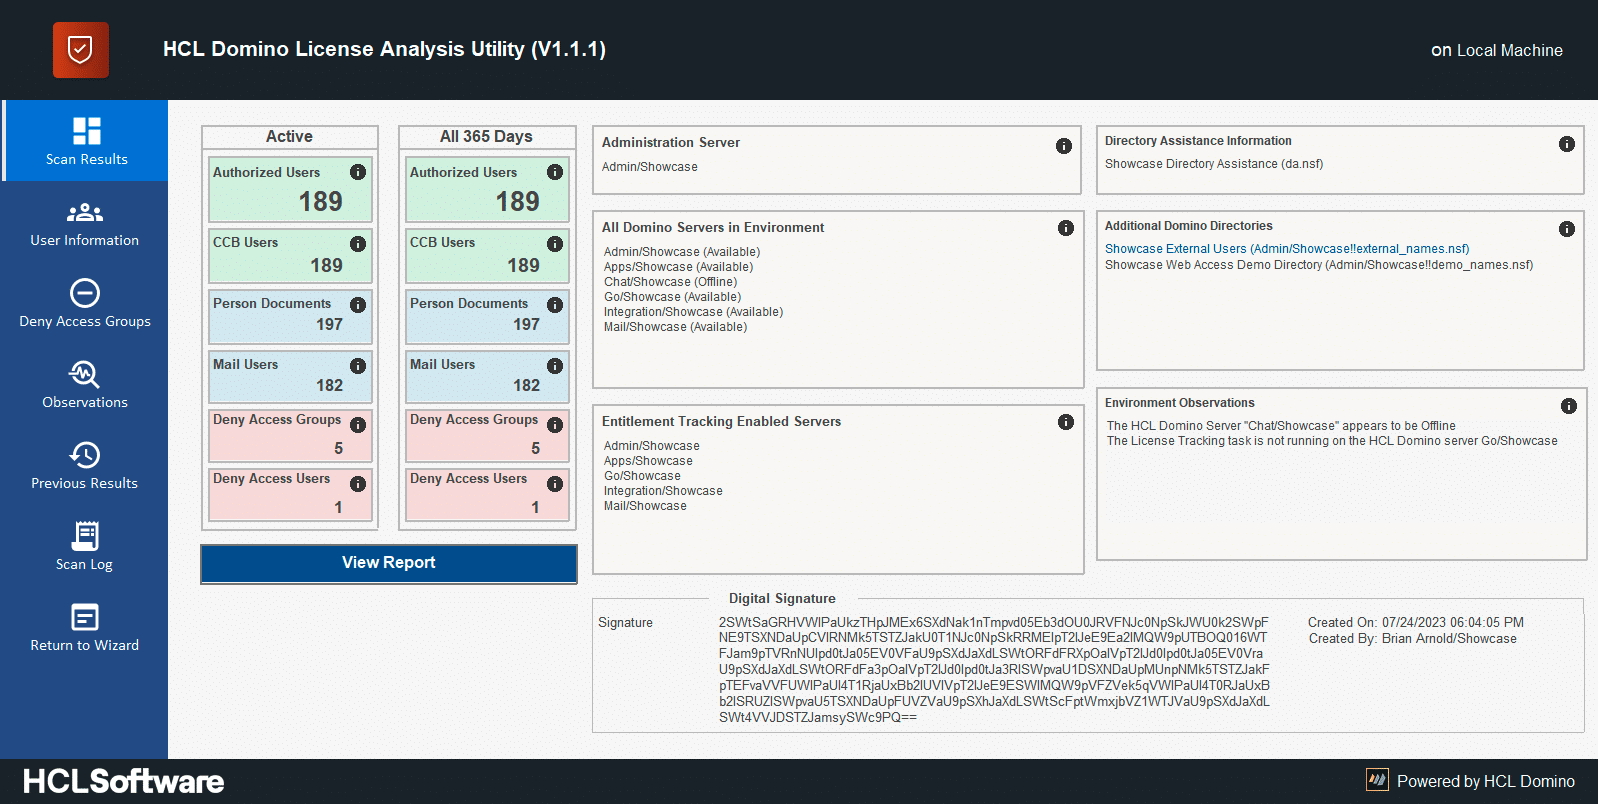 An example screen shot of the HCL DLAU tool